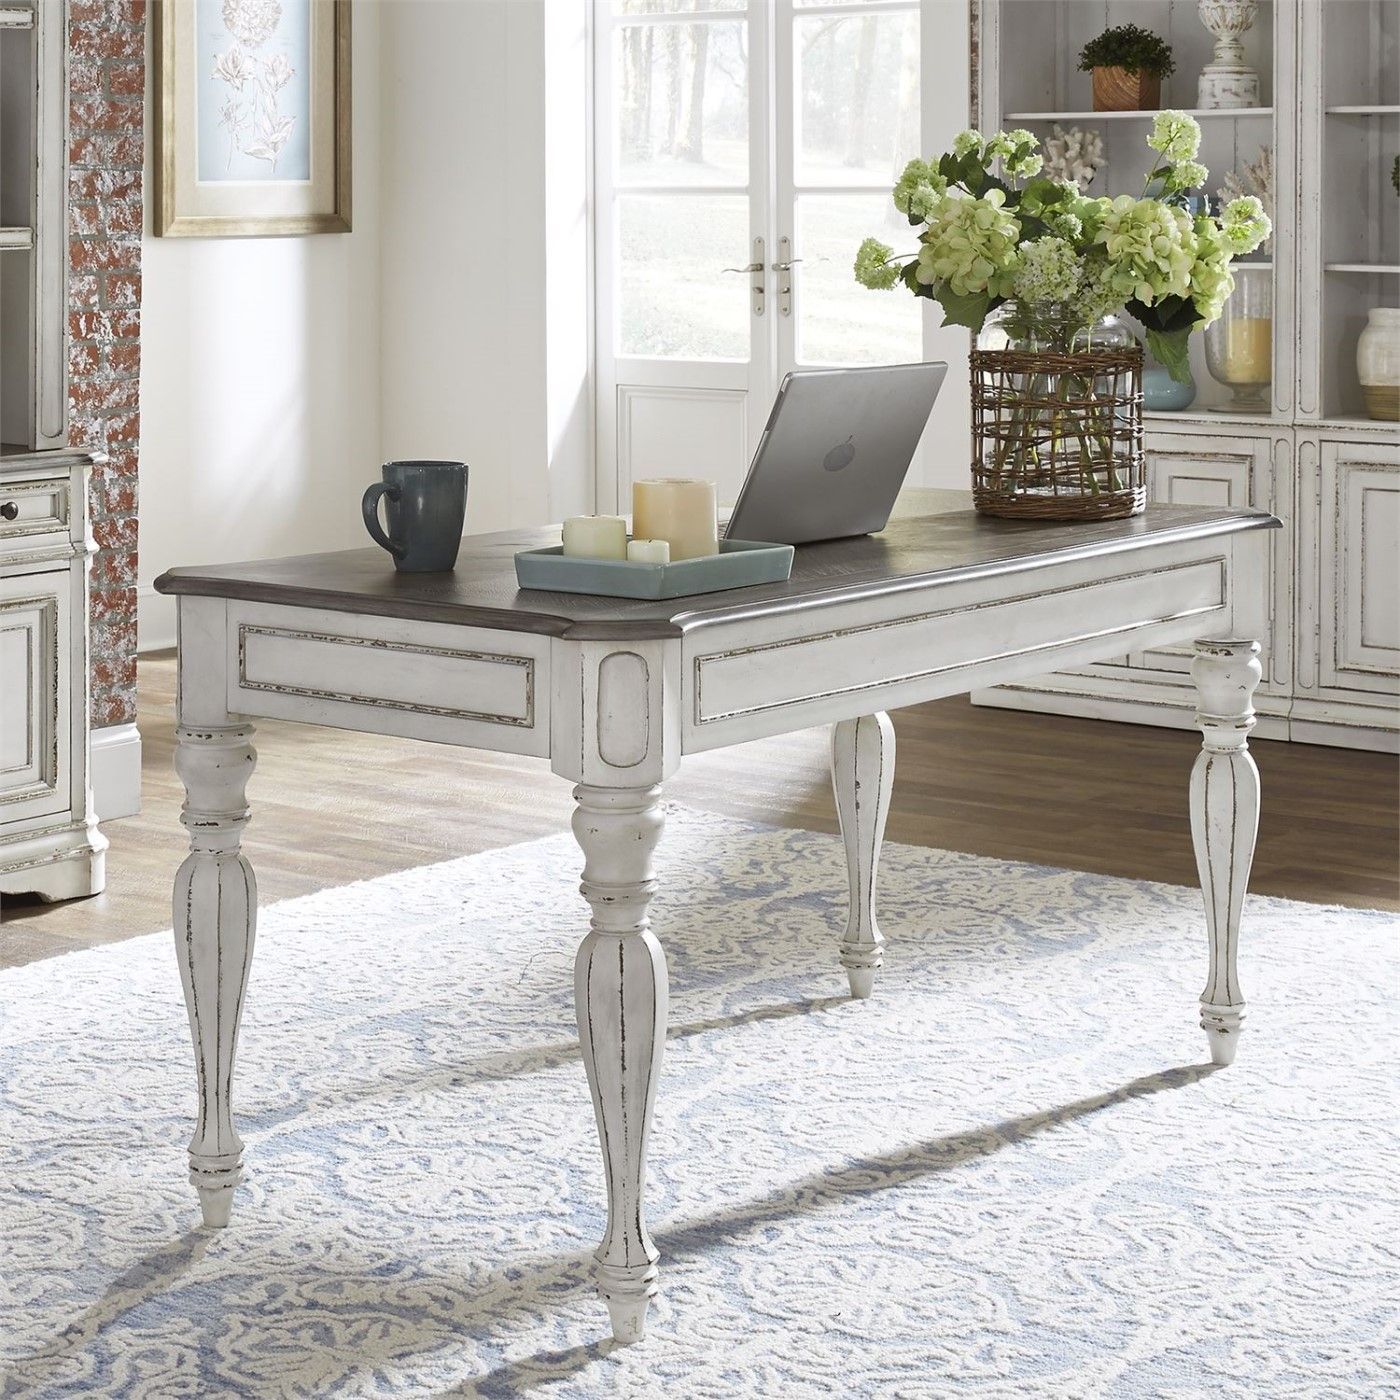 Magnolia Traditional Antique White Writing Desk With Flip Down Keyboard Inside White And Cement Writing Desks (View 11 of 15)